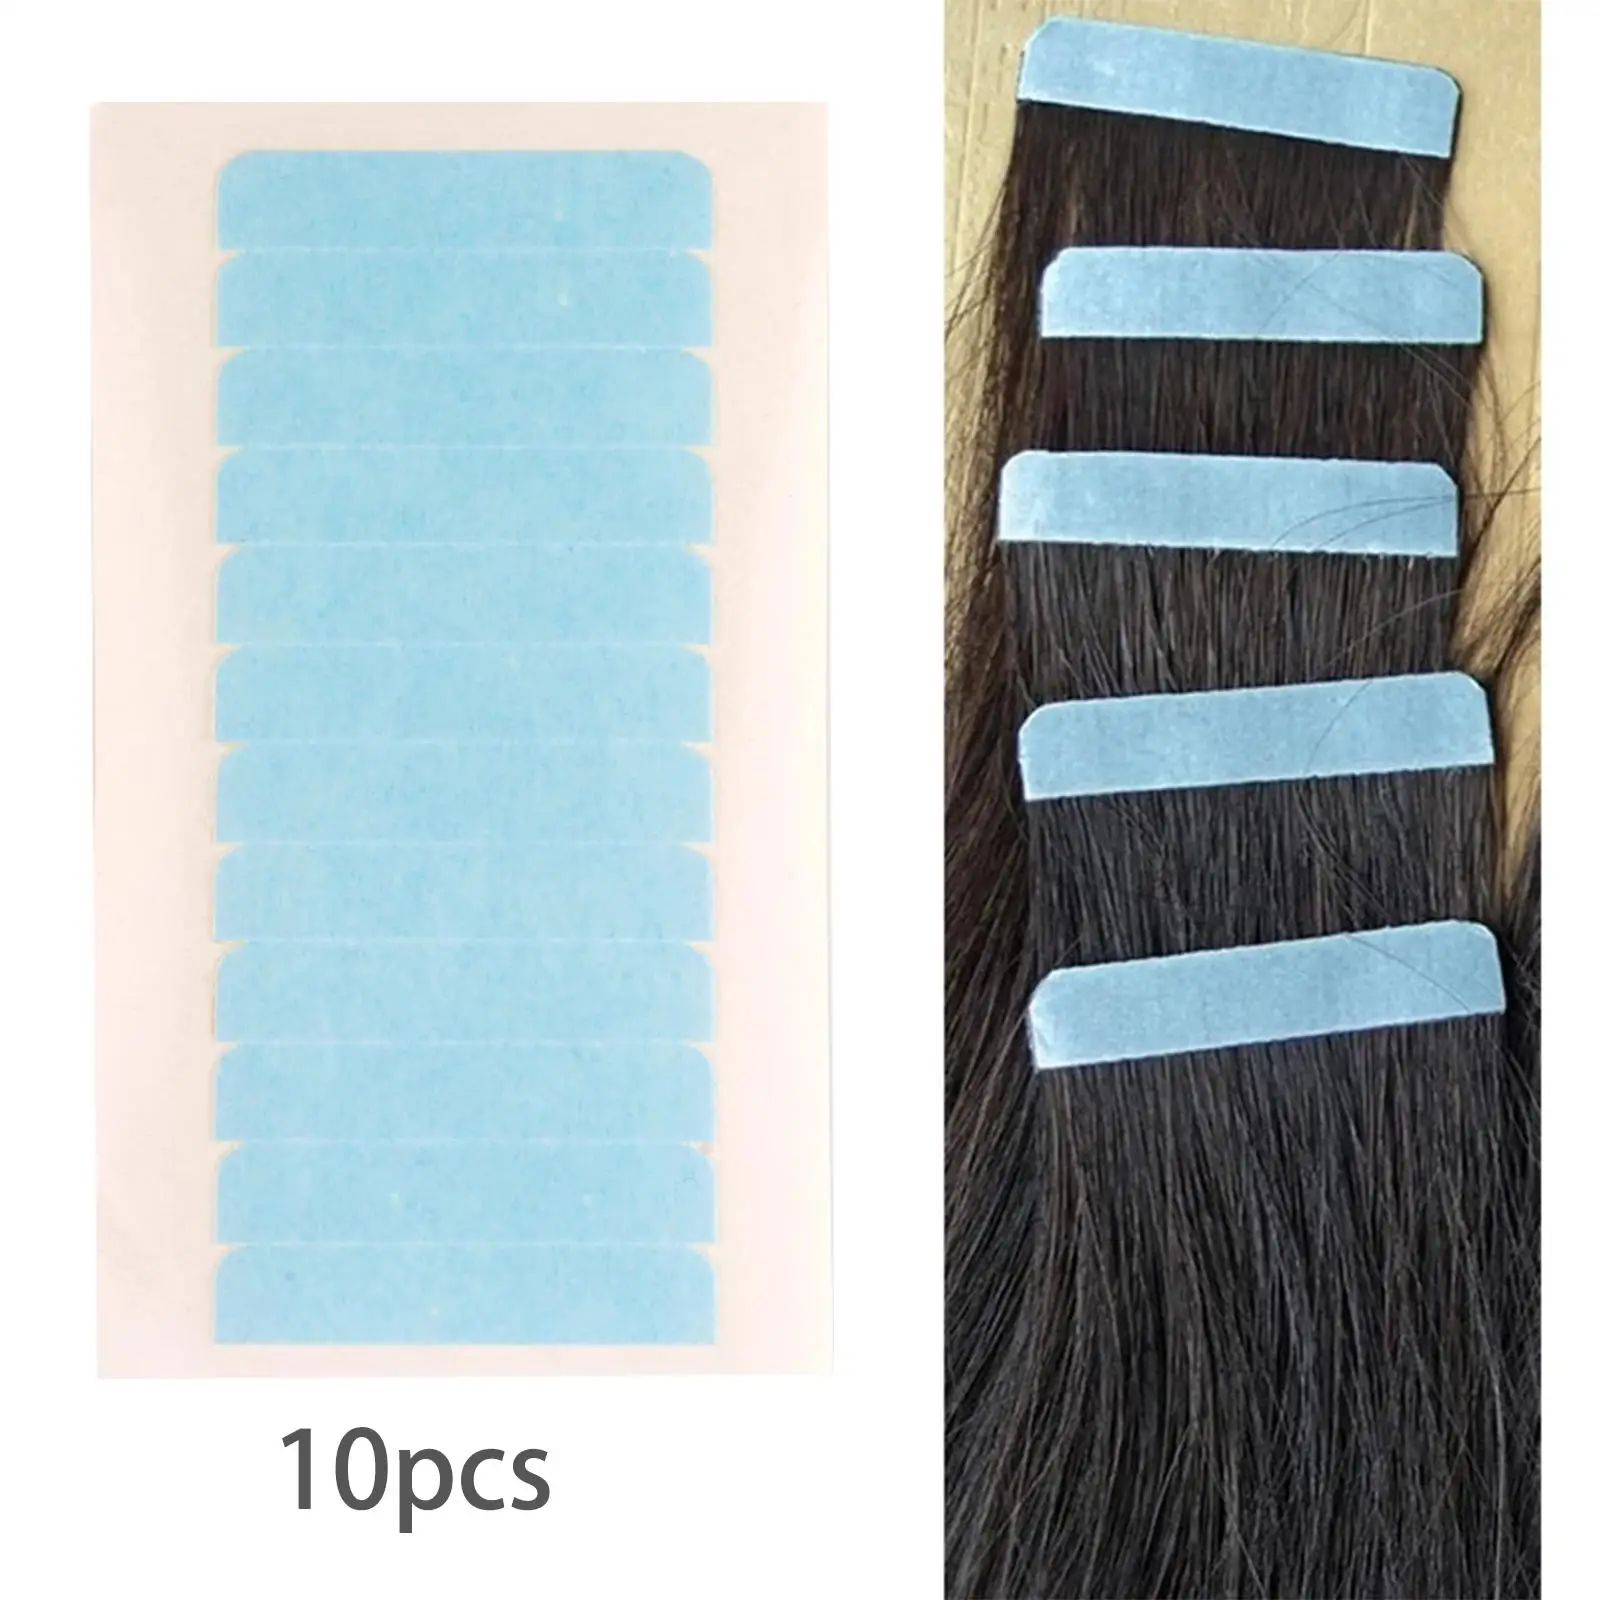 Double Sided Hair Extensions Tape Toupee Tape Pieces Adhesive 4cm Waterproof Supplies Wig for Skin Salons Girls Replacement DIY